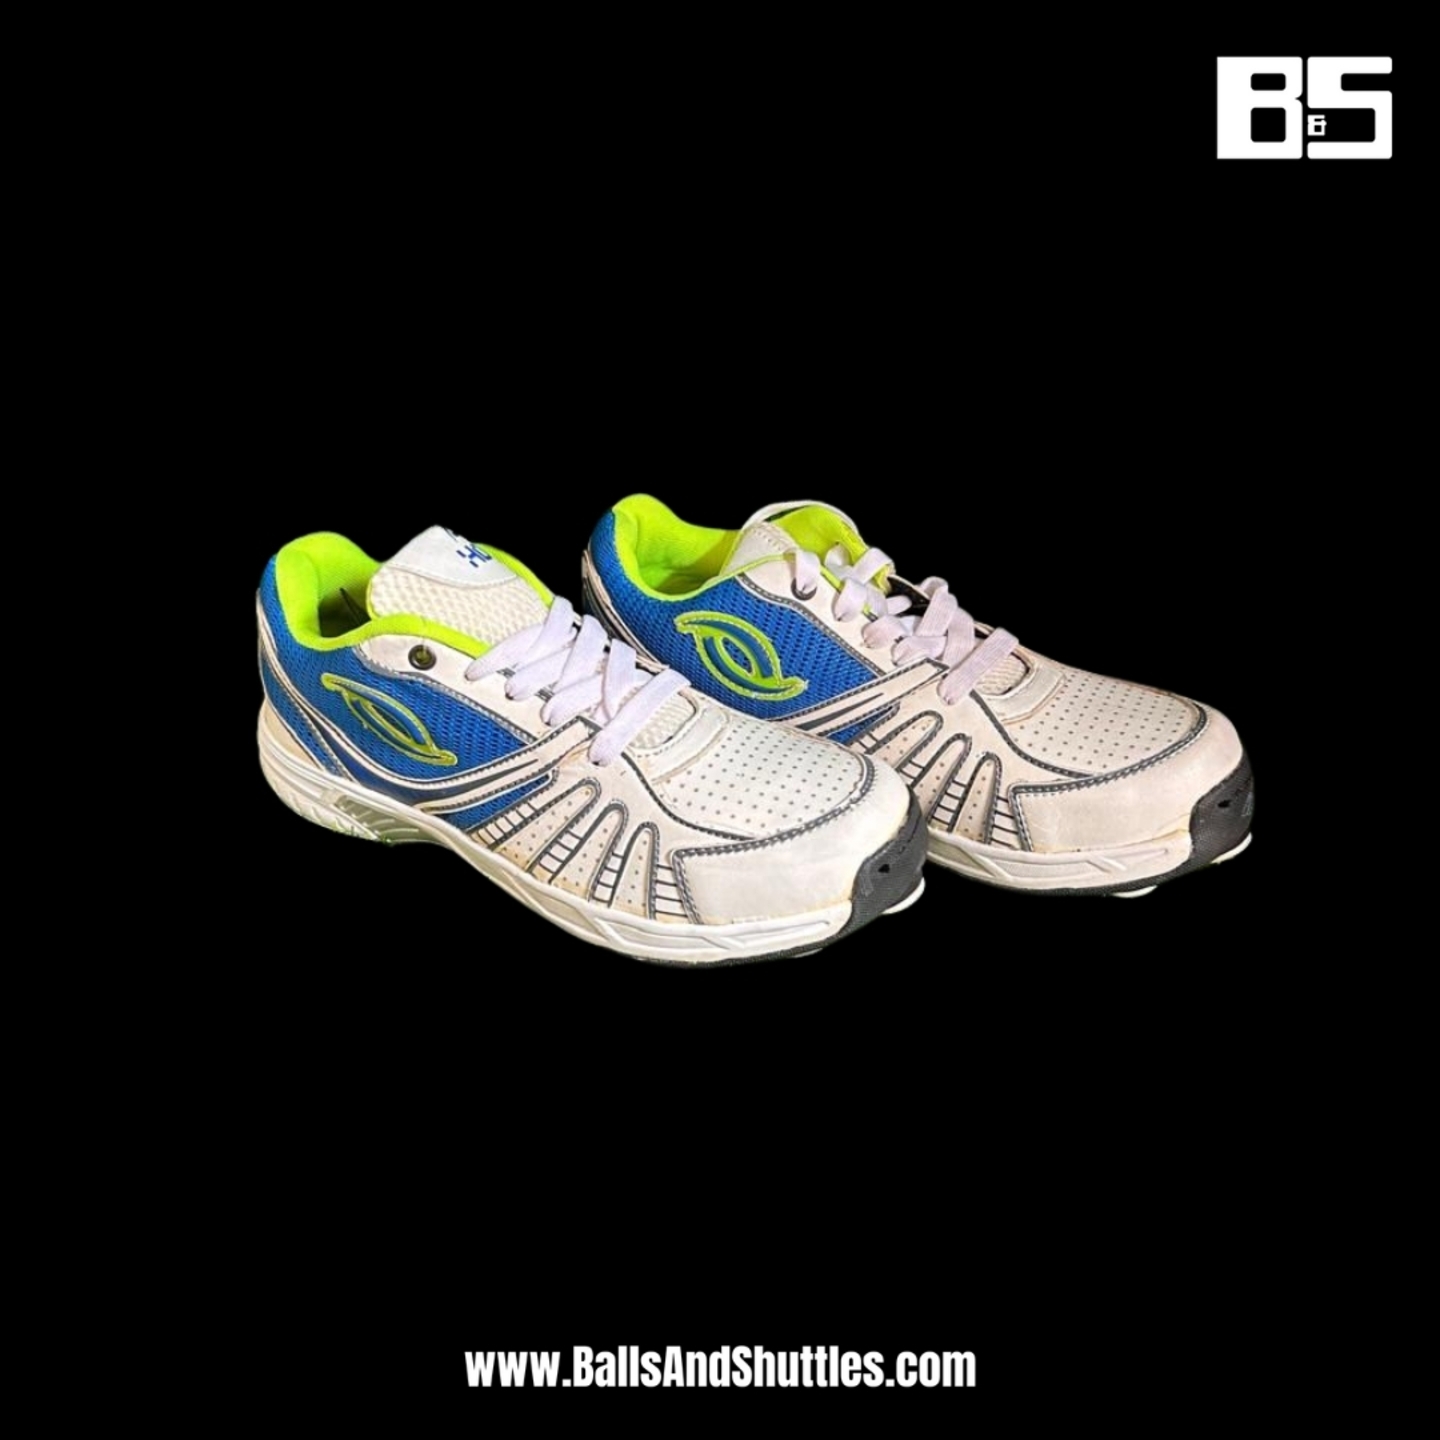 HDL TERMINATOR SIZE 5 CRICKET SHOES | HDL CRICKET SPIKES SHOES | HDL CRICKET HALF SPIKES SHOES | HDL CRICKET SHOES